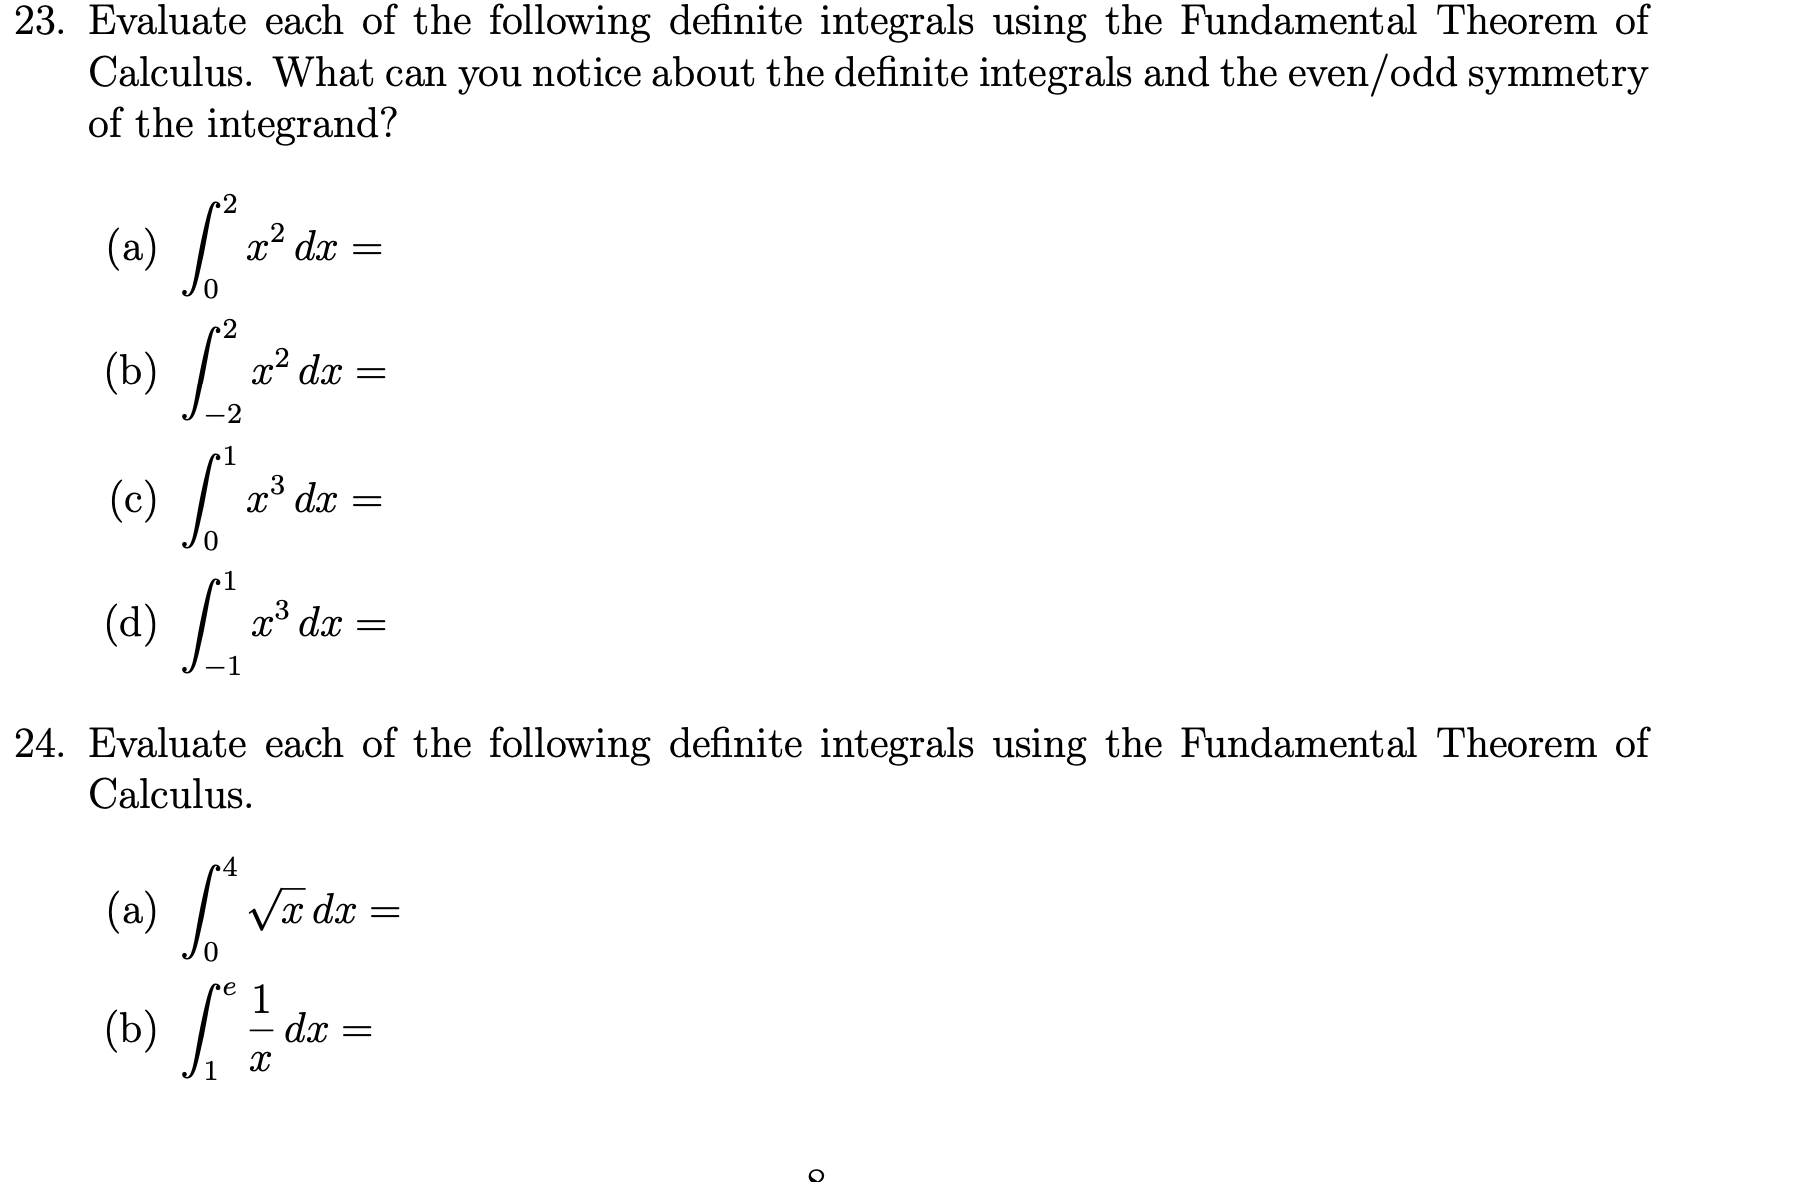 23. Evaluate each of the following definite integrals using the Fundamental Theorem of
Calculus. What can you notice about the definite integrals and the even/odd symmetry
of the integrand?
2
(a) /:
x? dx
.2
(b) /
x² dx
-2
1
(c) /
x³ dx
e1
